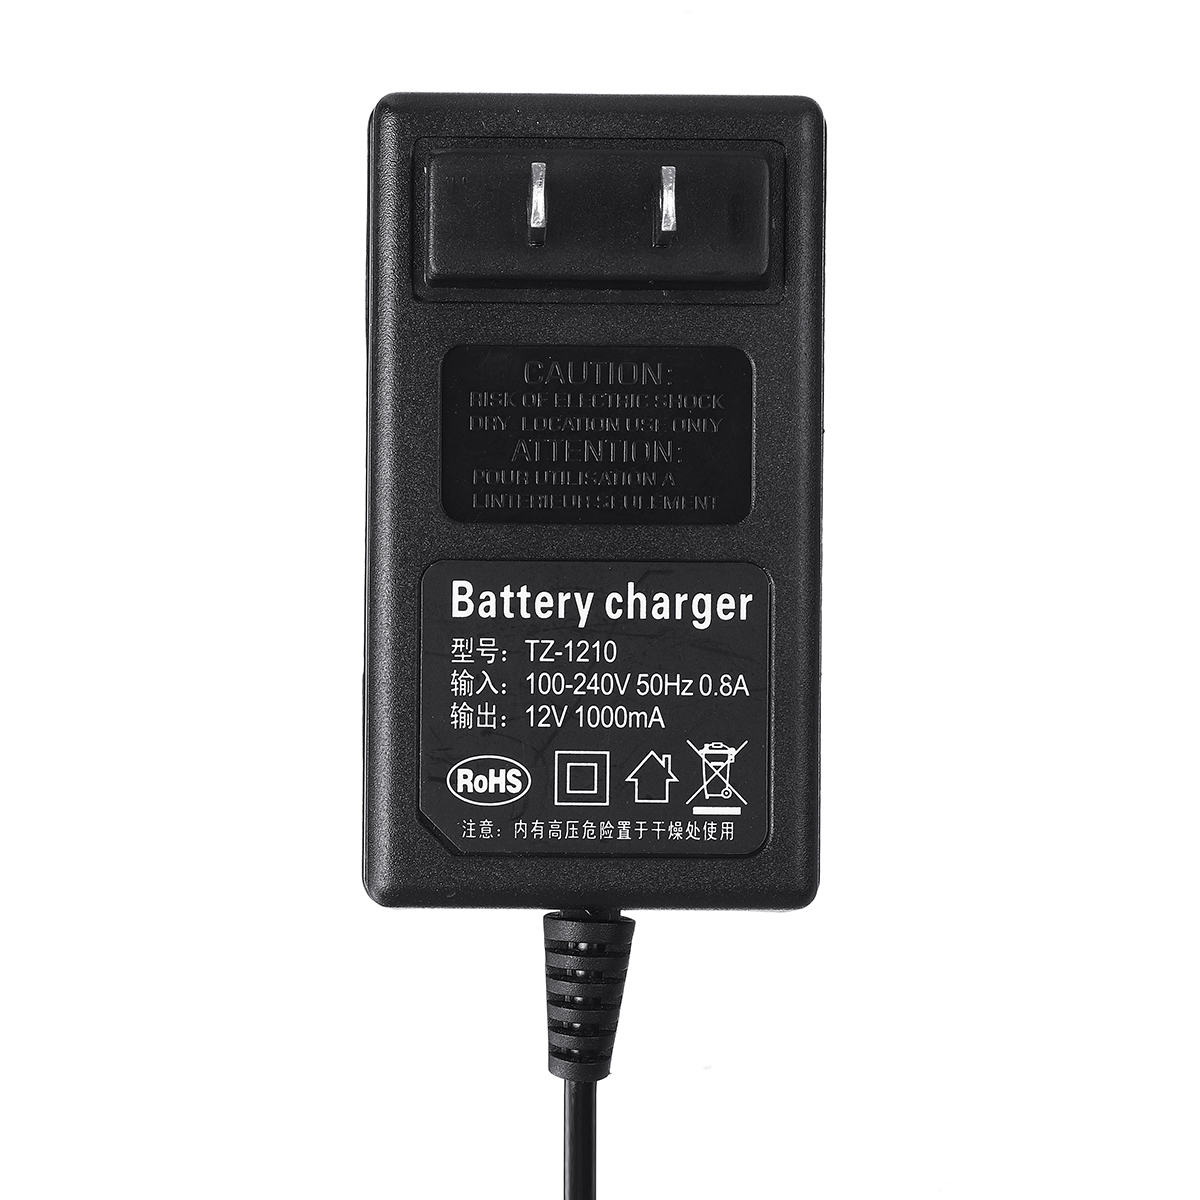 AC-100V-240V-50Hz-06A-Input-12V-1000mAh-Output-Battery-Charger-for-Makita-Electric-Drill-General-Bat-1794719-9